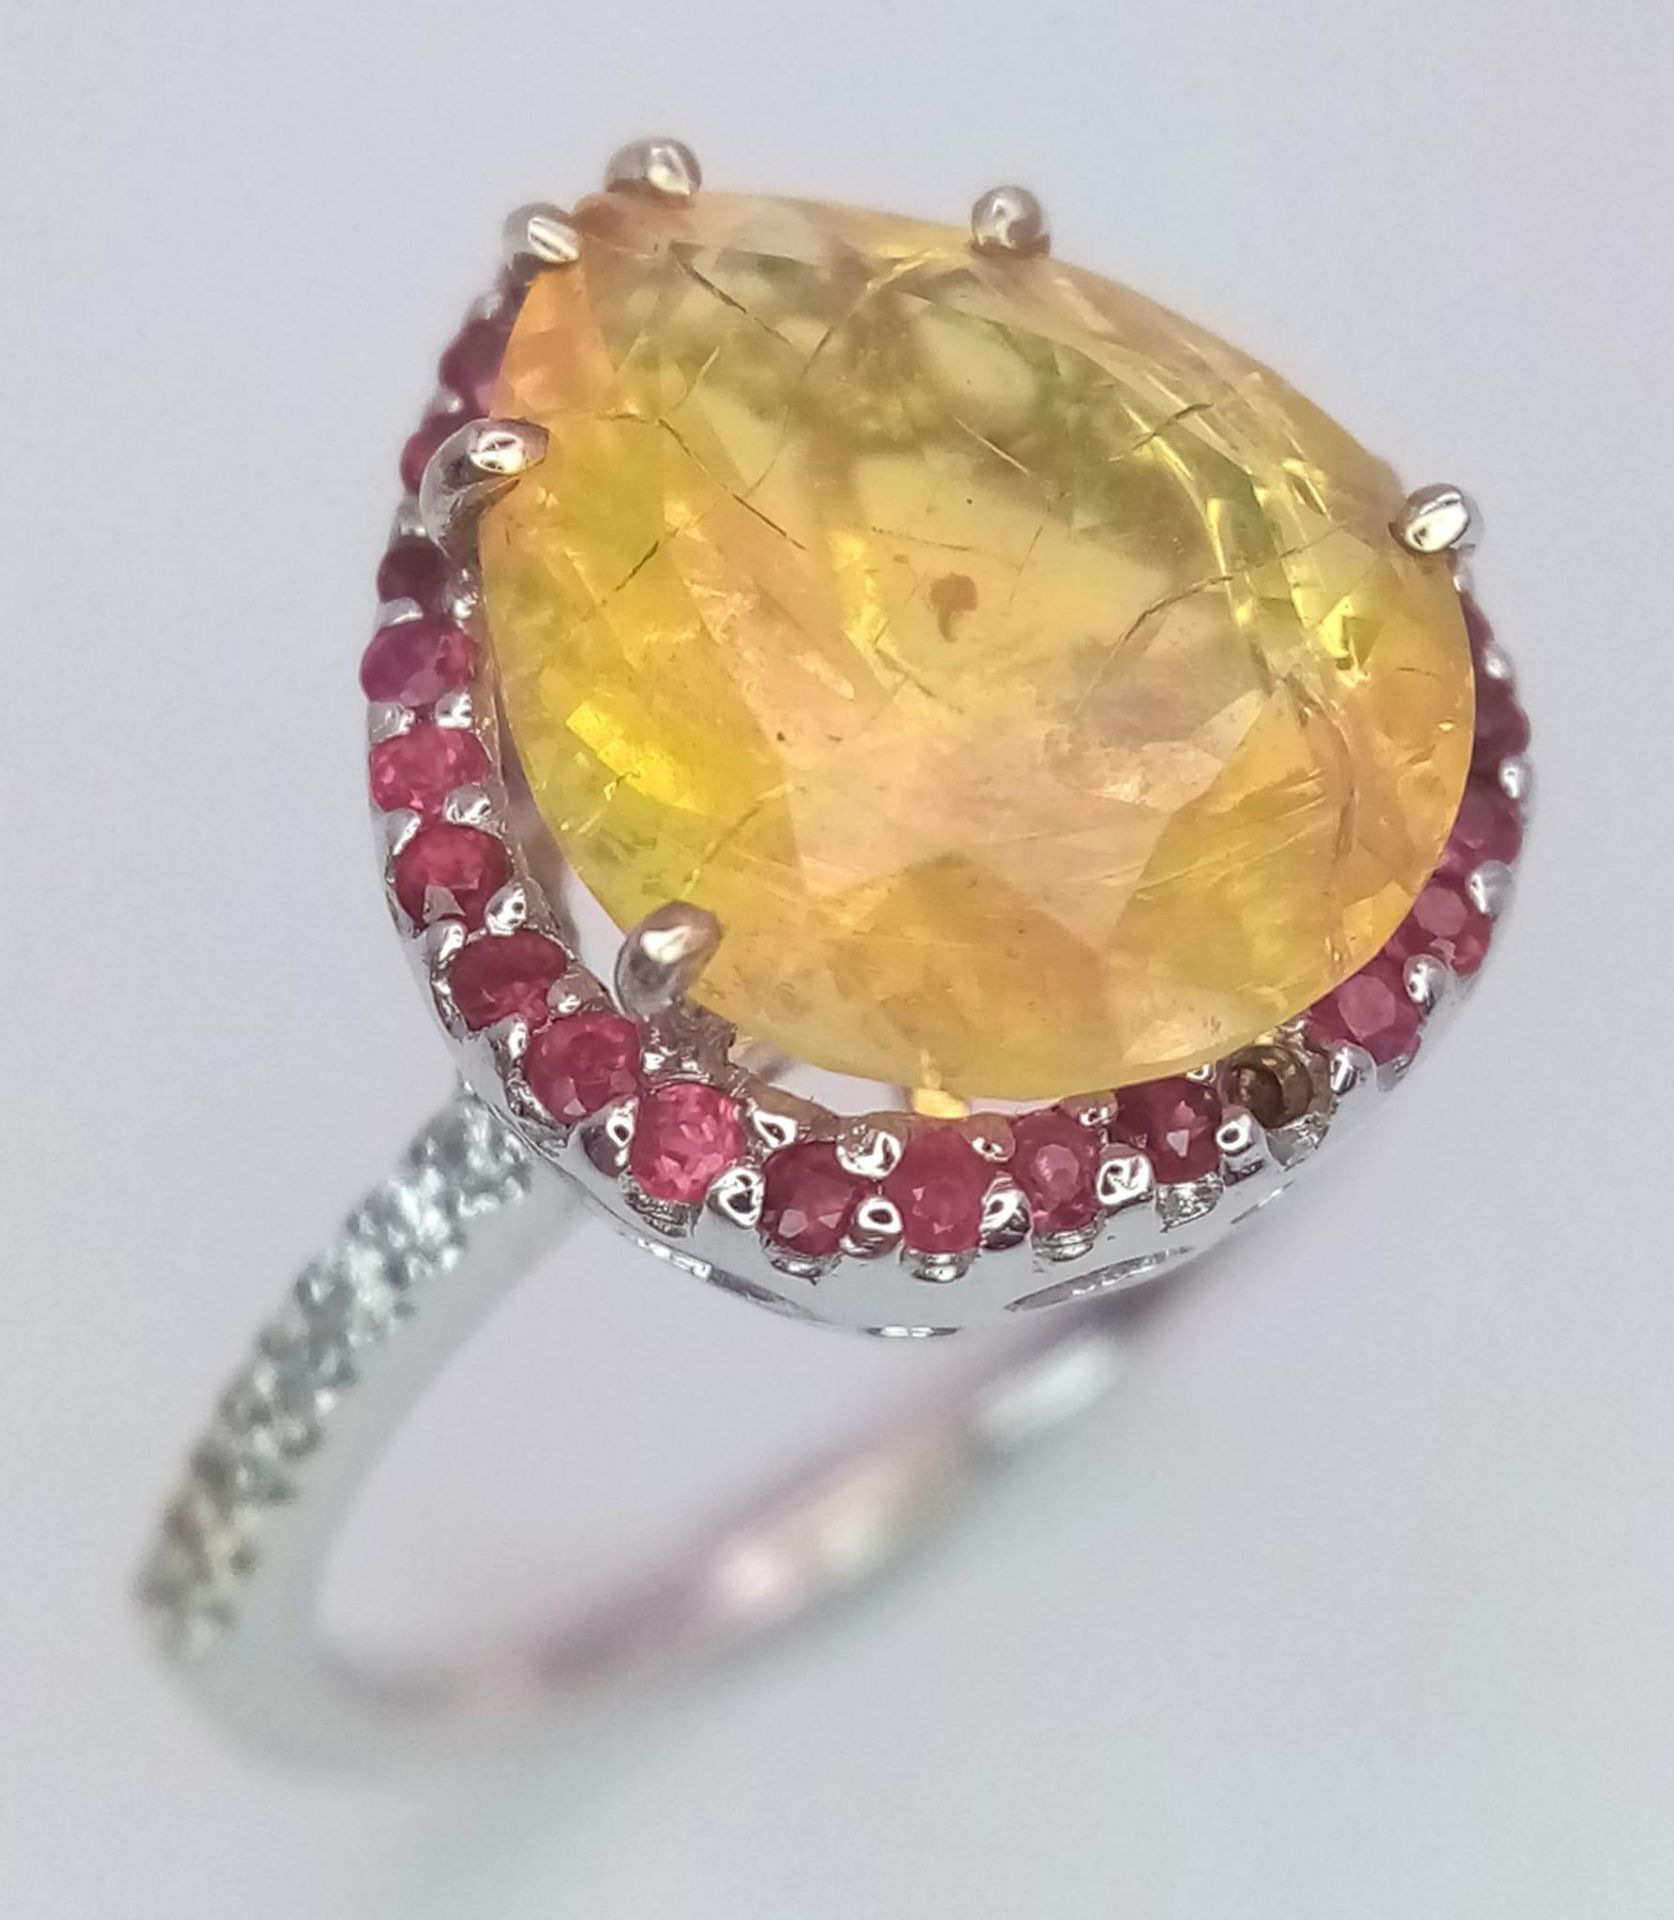 An 18 K white gold ring with a large, pear cut, fire opal exhibiting orange and green hues, - Image 3 of 9